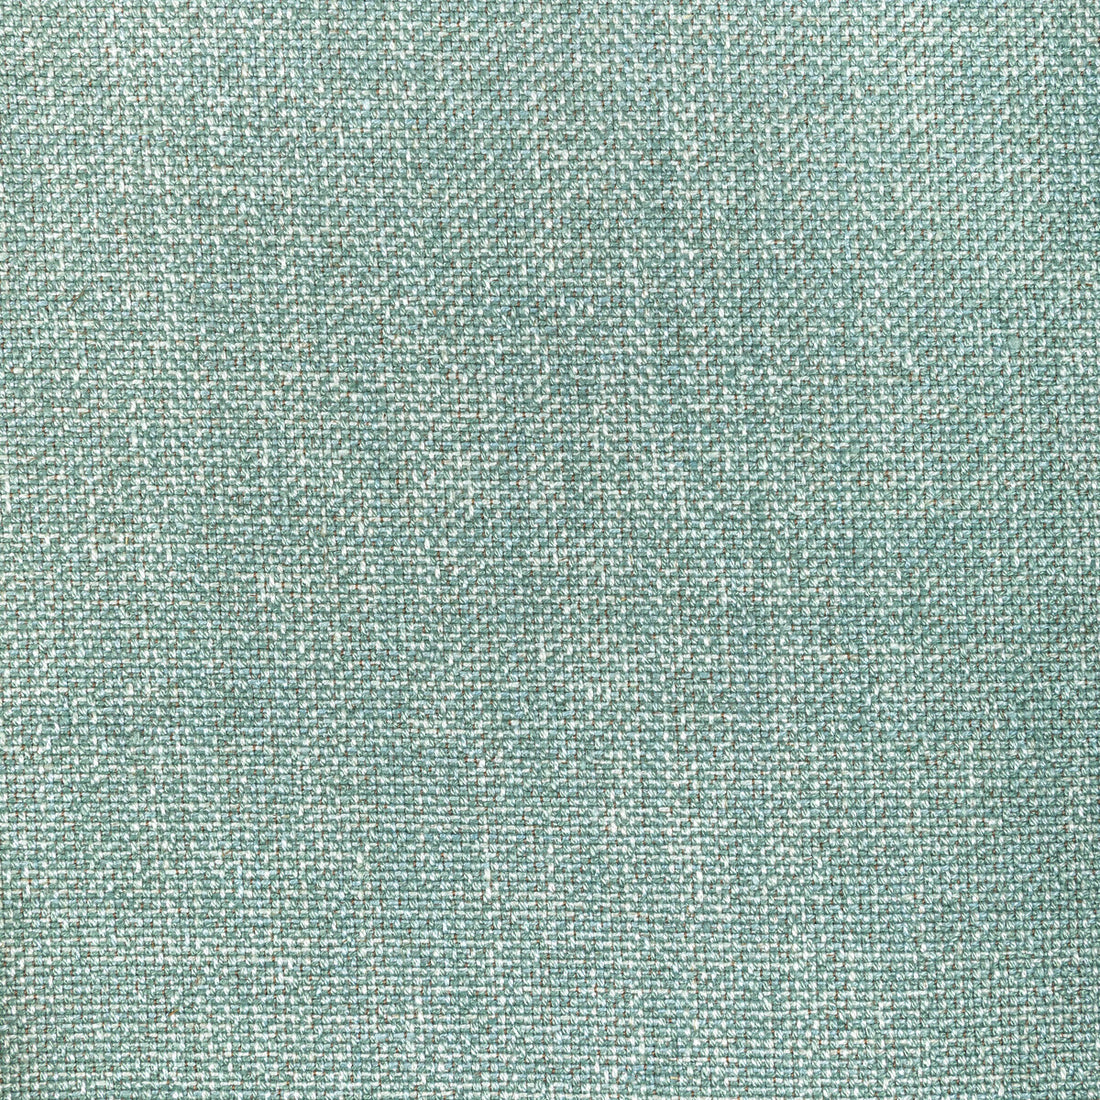 Rospico Plain fabric in aqua color - pattern 8022110.13.0 - by Brunschwig &amp; Fils in the Lorient Weaves collection